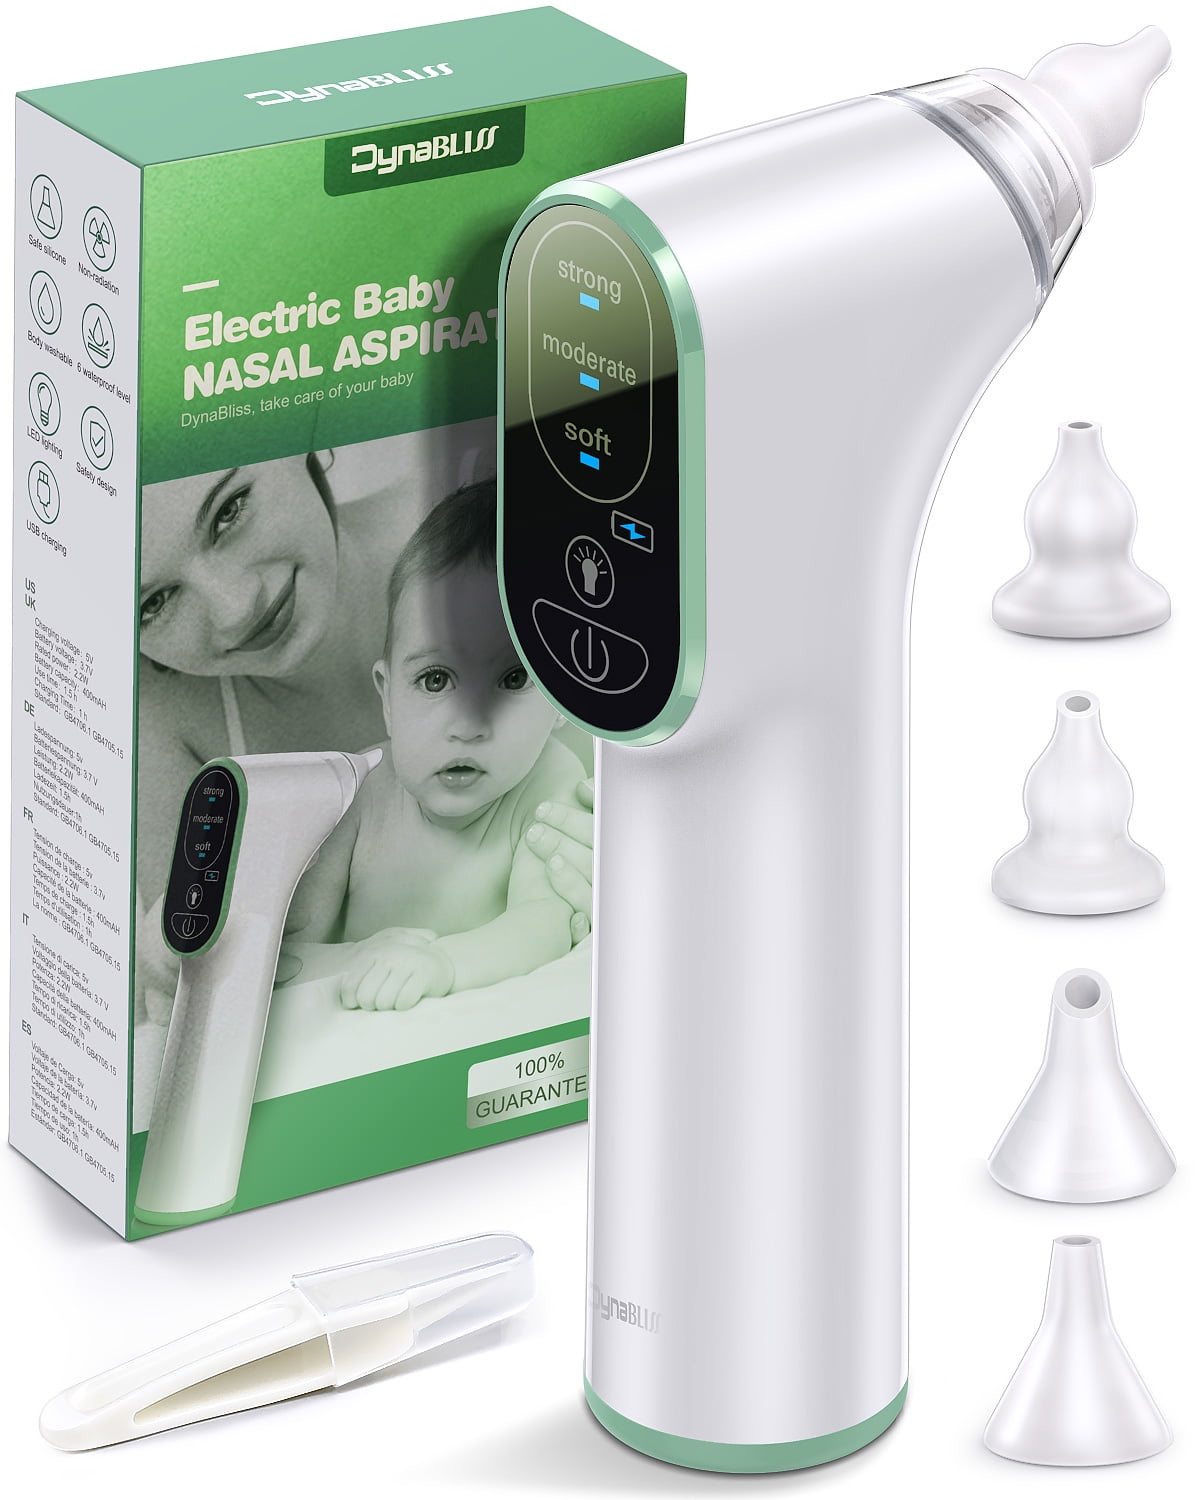 Our award-winning NeilMed Baby NäsaKleen Nasal Aspirator cleans an infant's  nose by ridding it of excess mucus and can safely be used on newborns,, By NeilMed Neti Pot